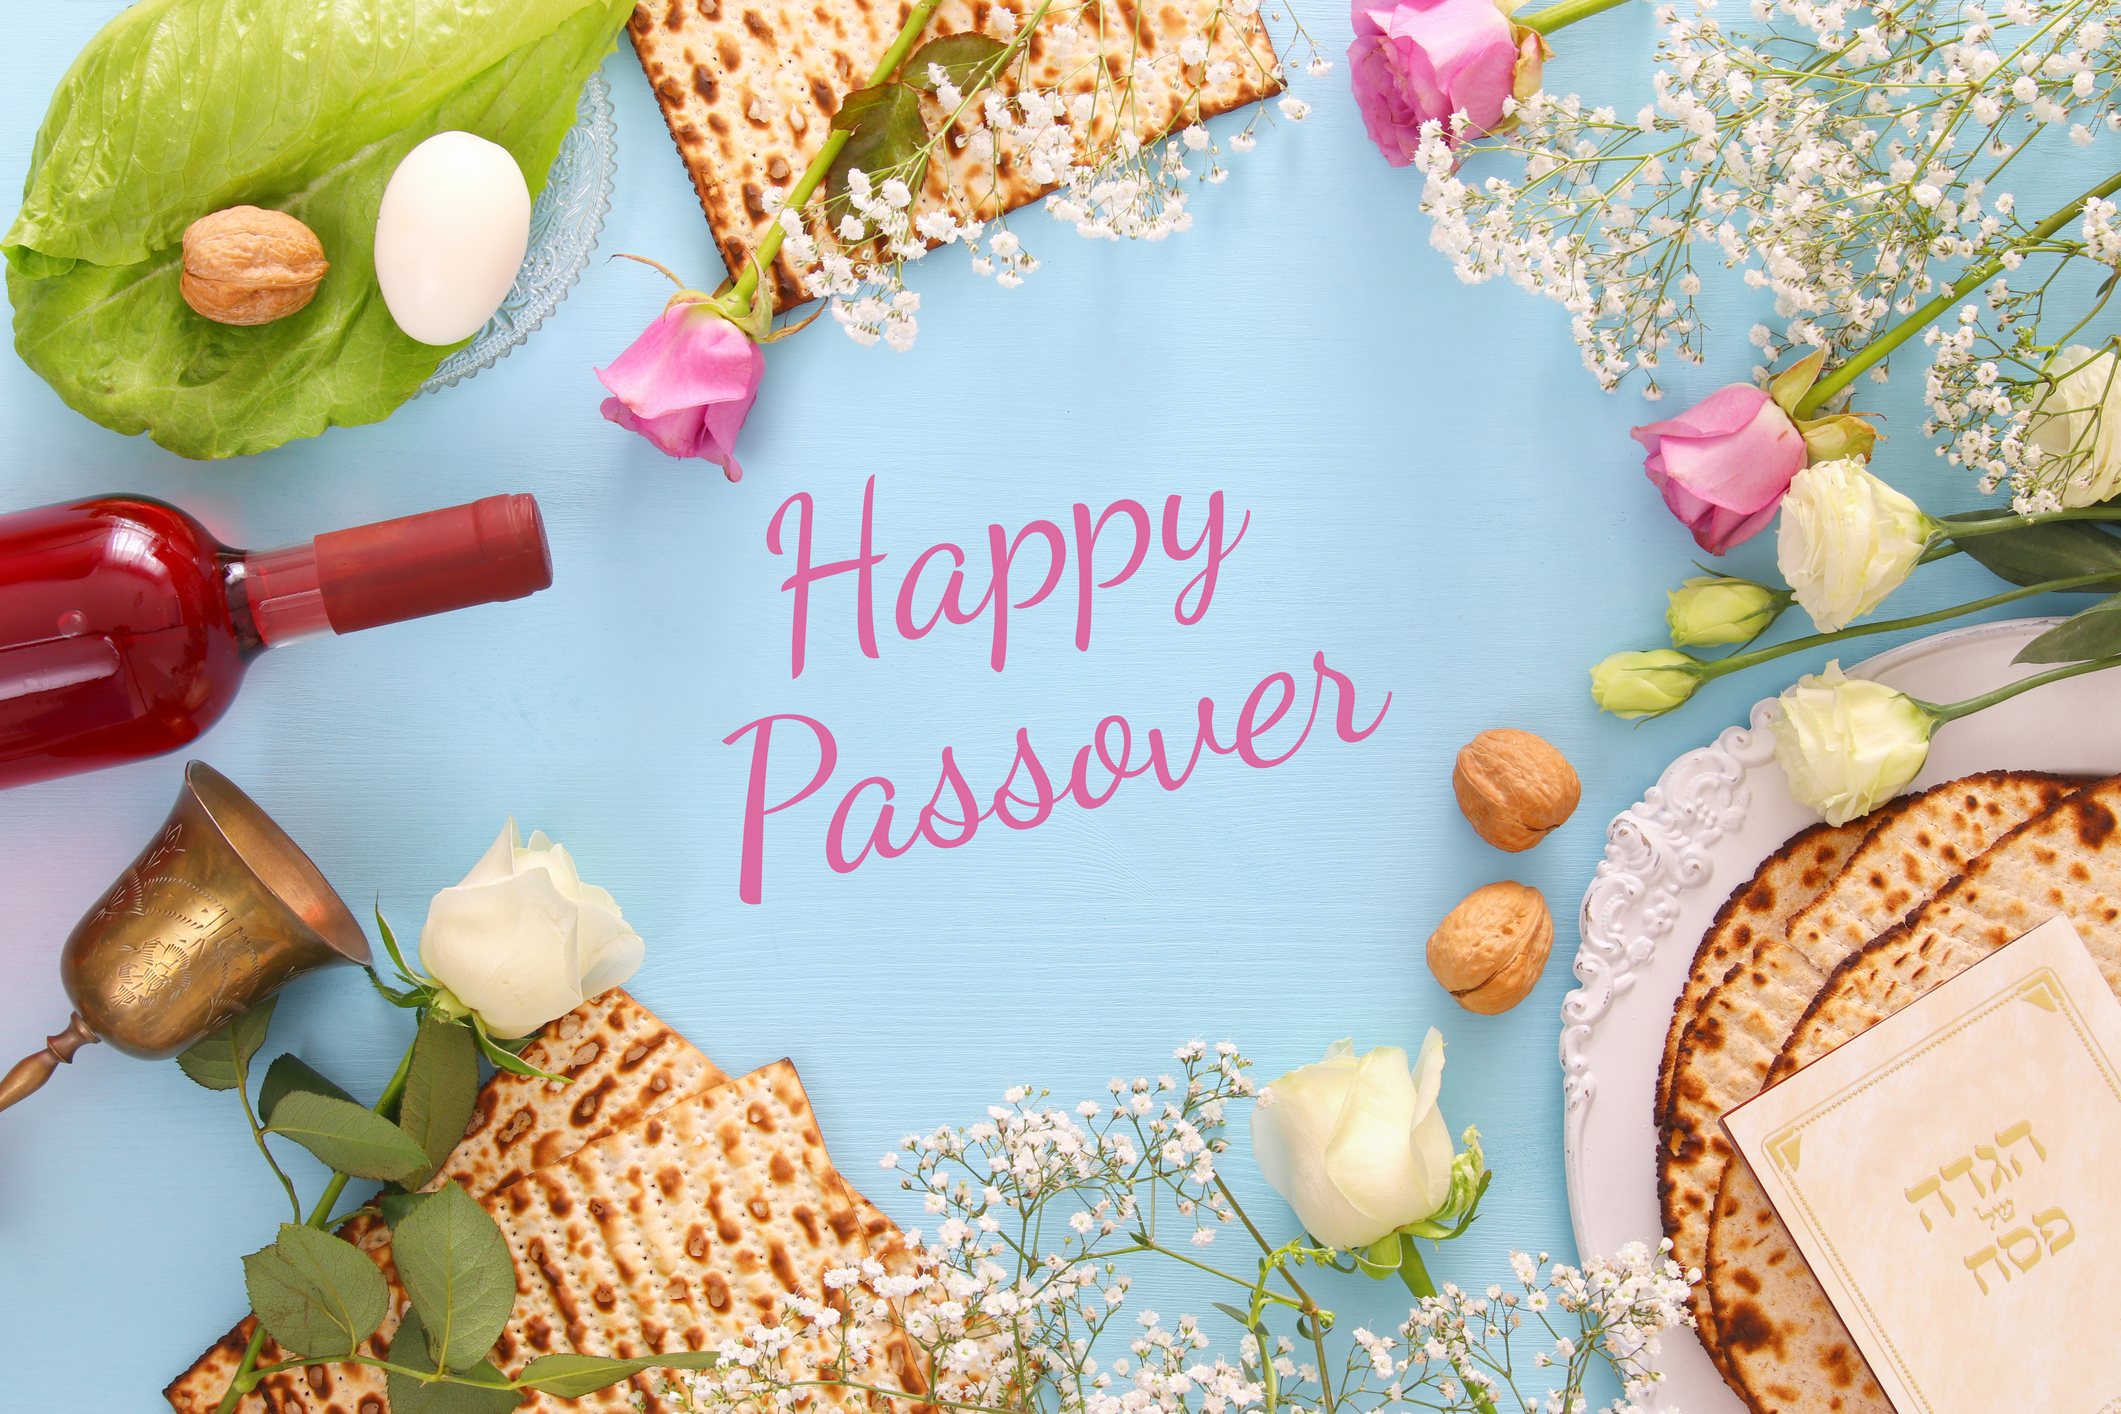 Happy Passover Image Pictures Photos HD Wallpaper